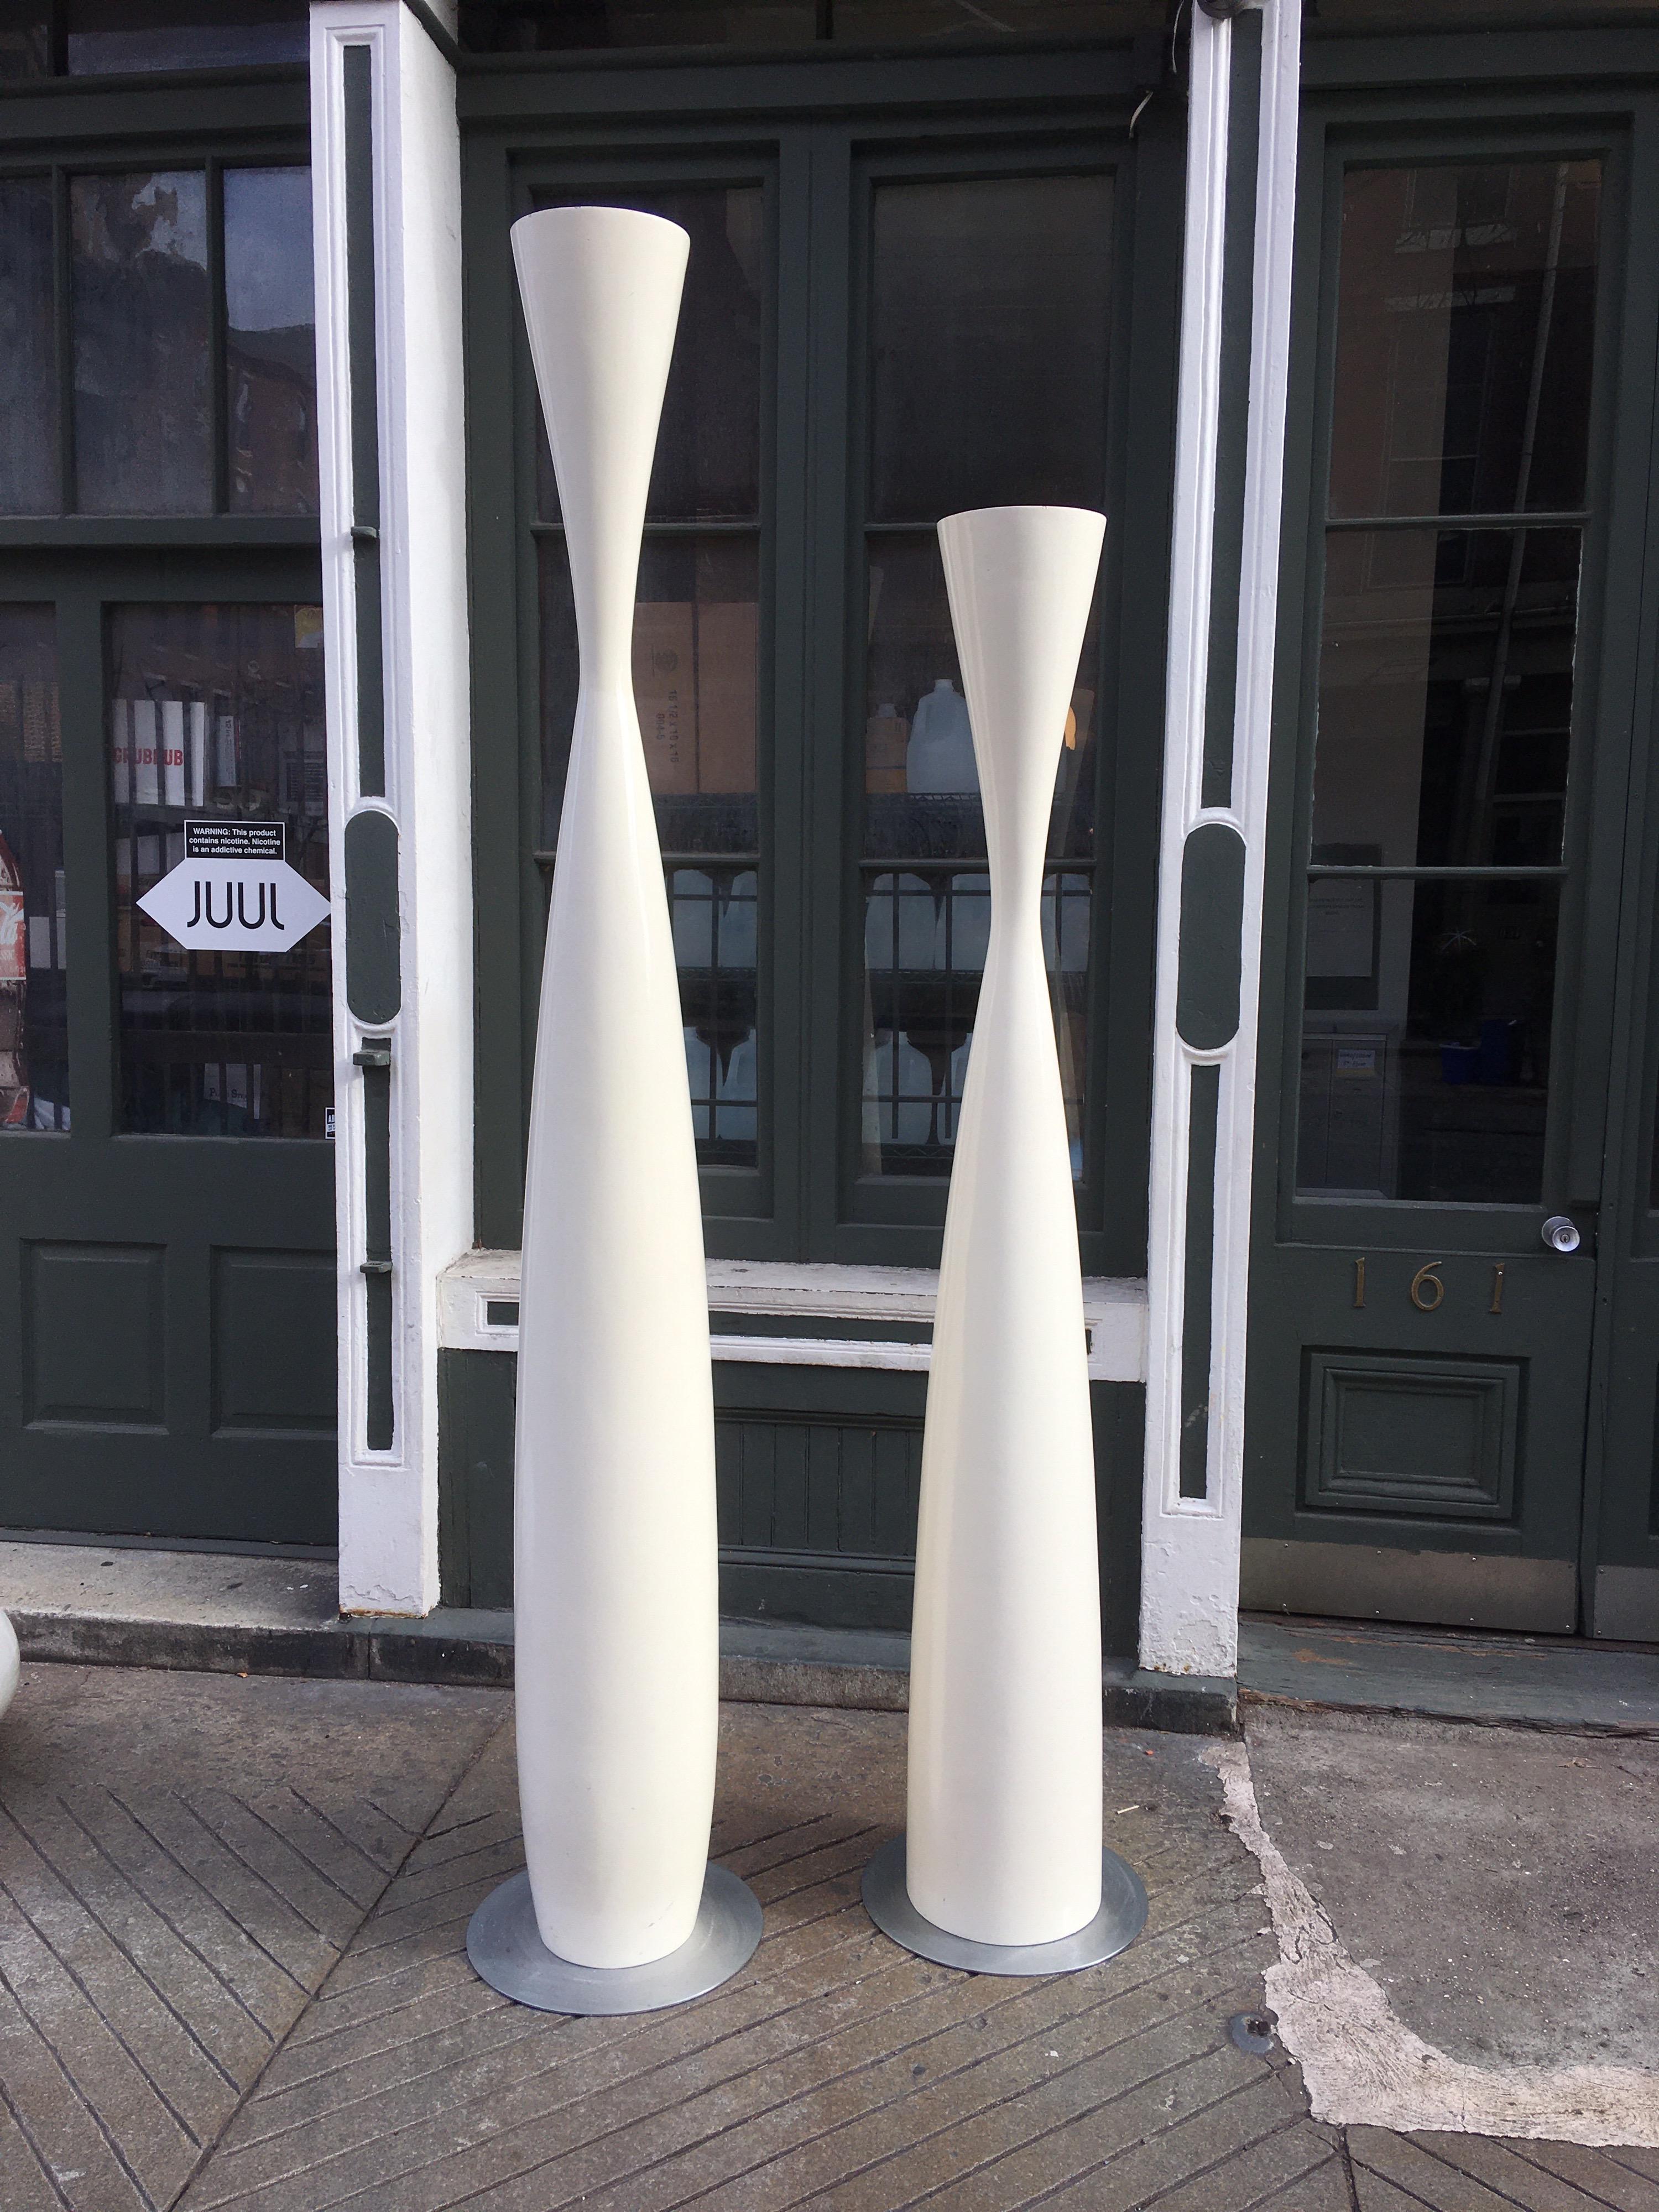 Fiberglass columns form Bonton retail stores, used in the 1980s and 1990s perfect for the Garden or next to the pool! Painted finish presents very well! A couple other shapes available, see photos. One column is 98